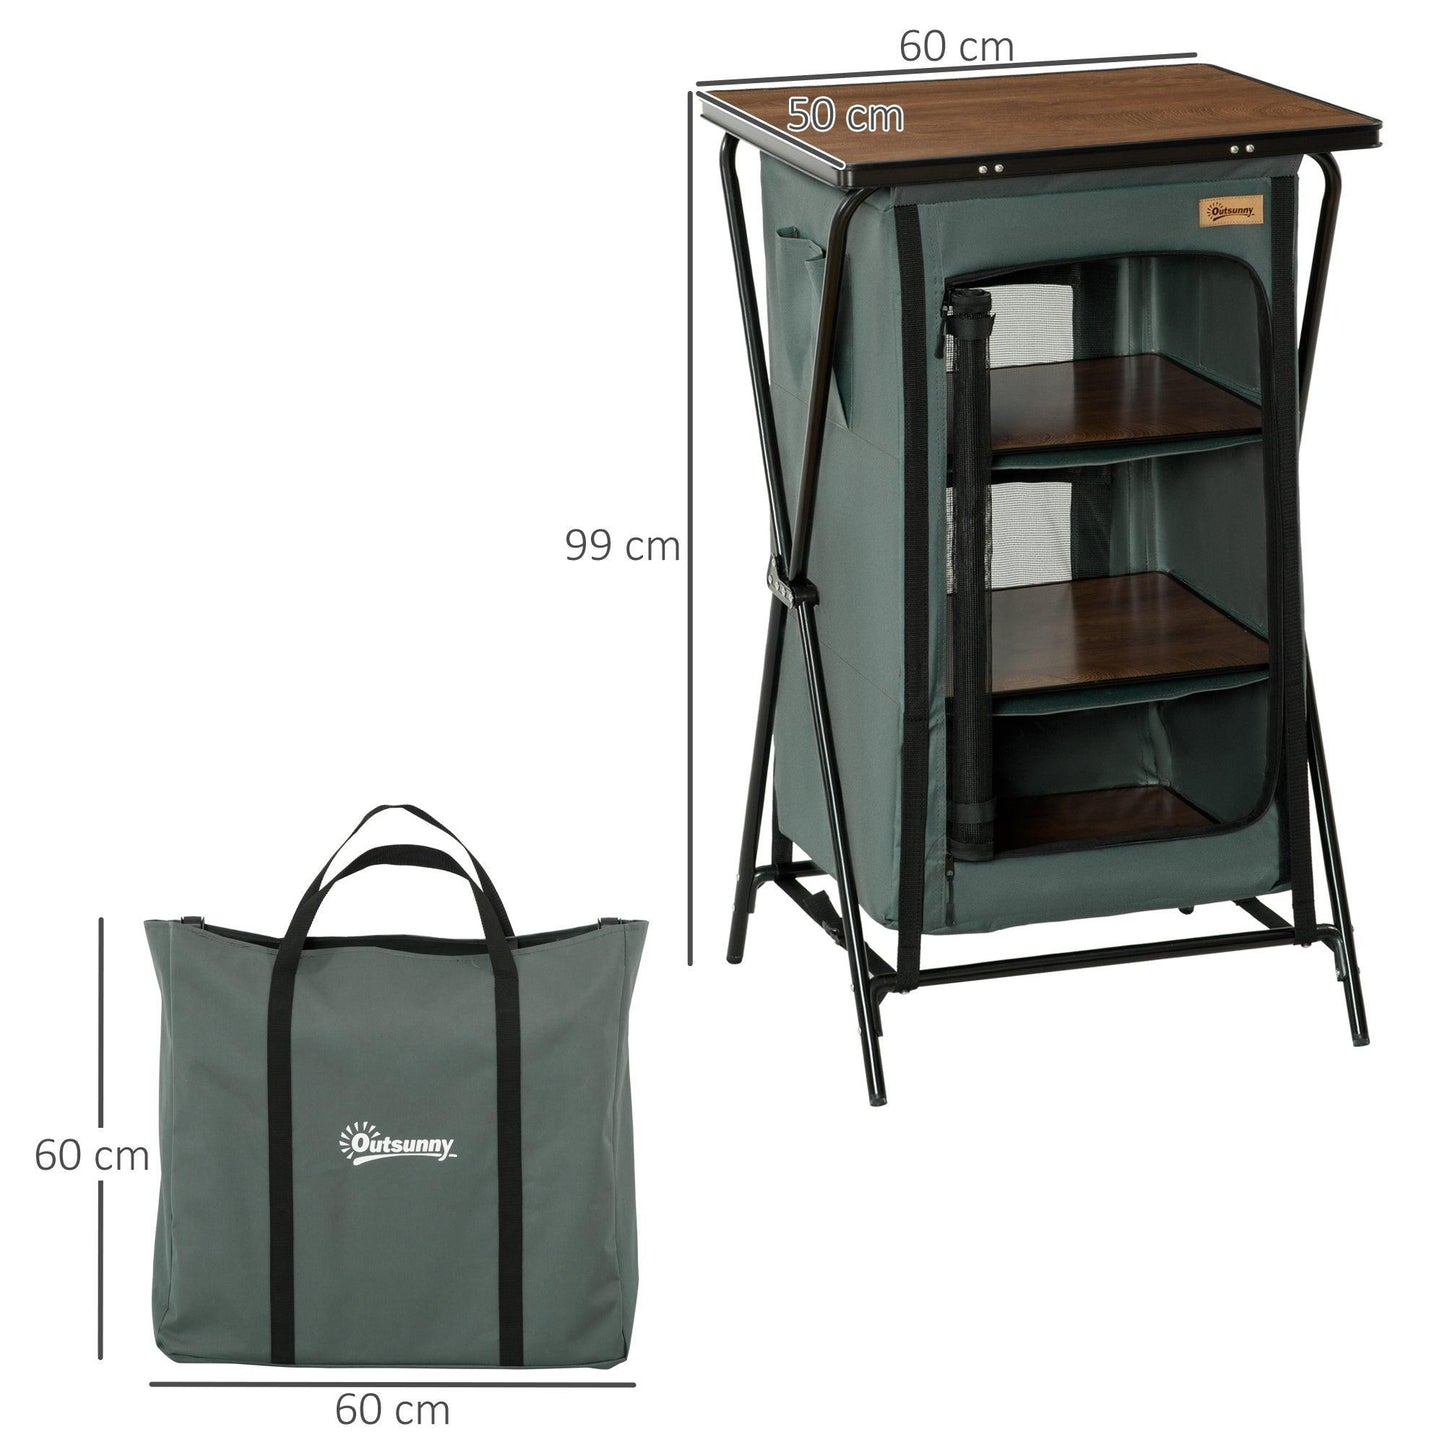 Outsunny Portable Camping Cupboard: Organised Kitchen Station - ALL4U RETAILER LTD